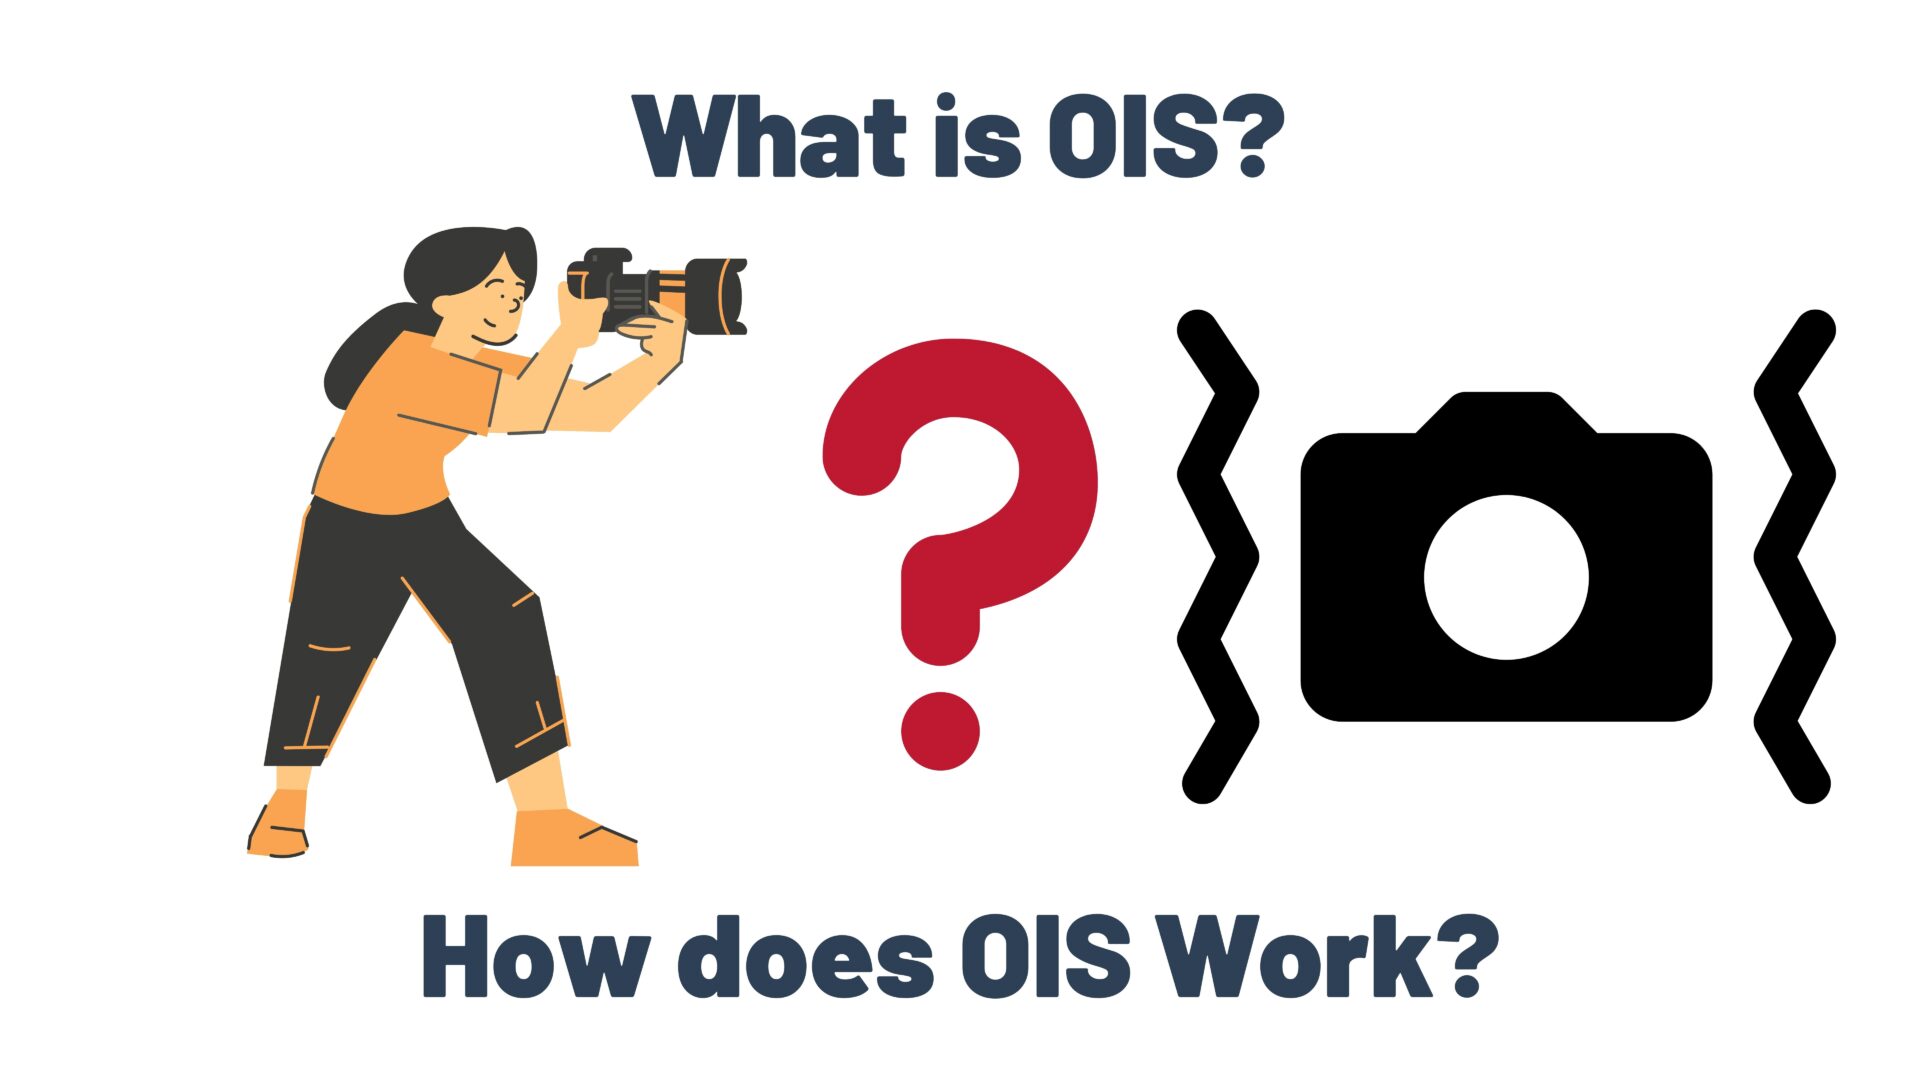 What is OIS?